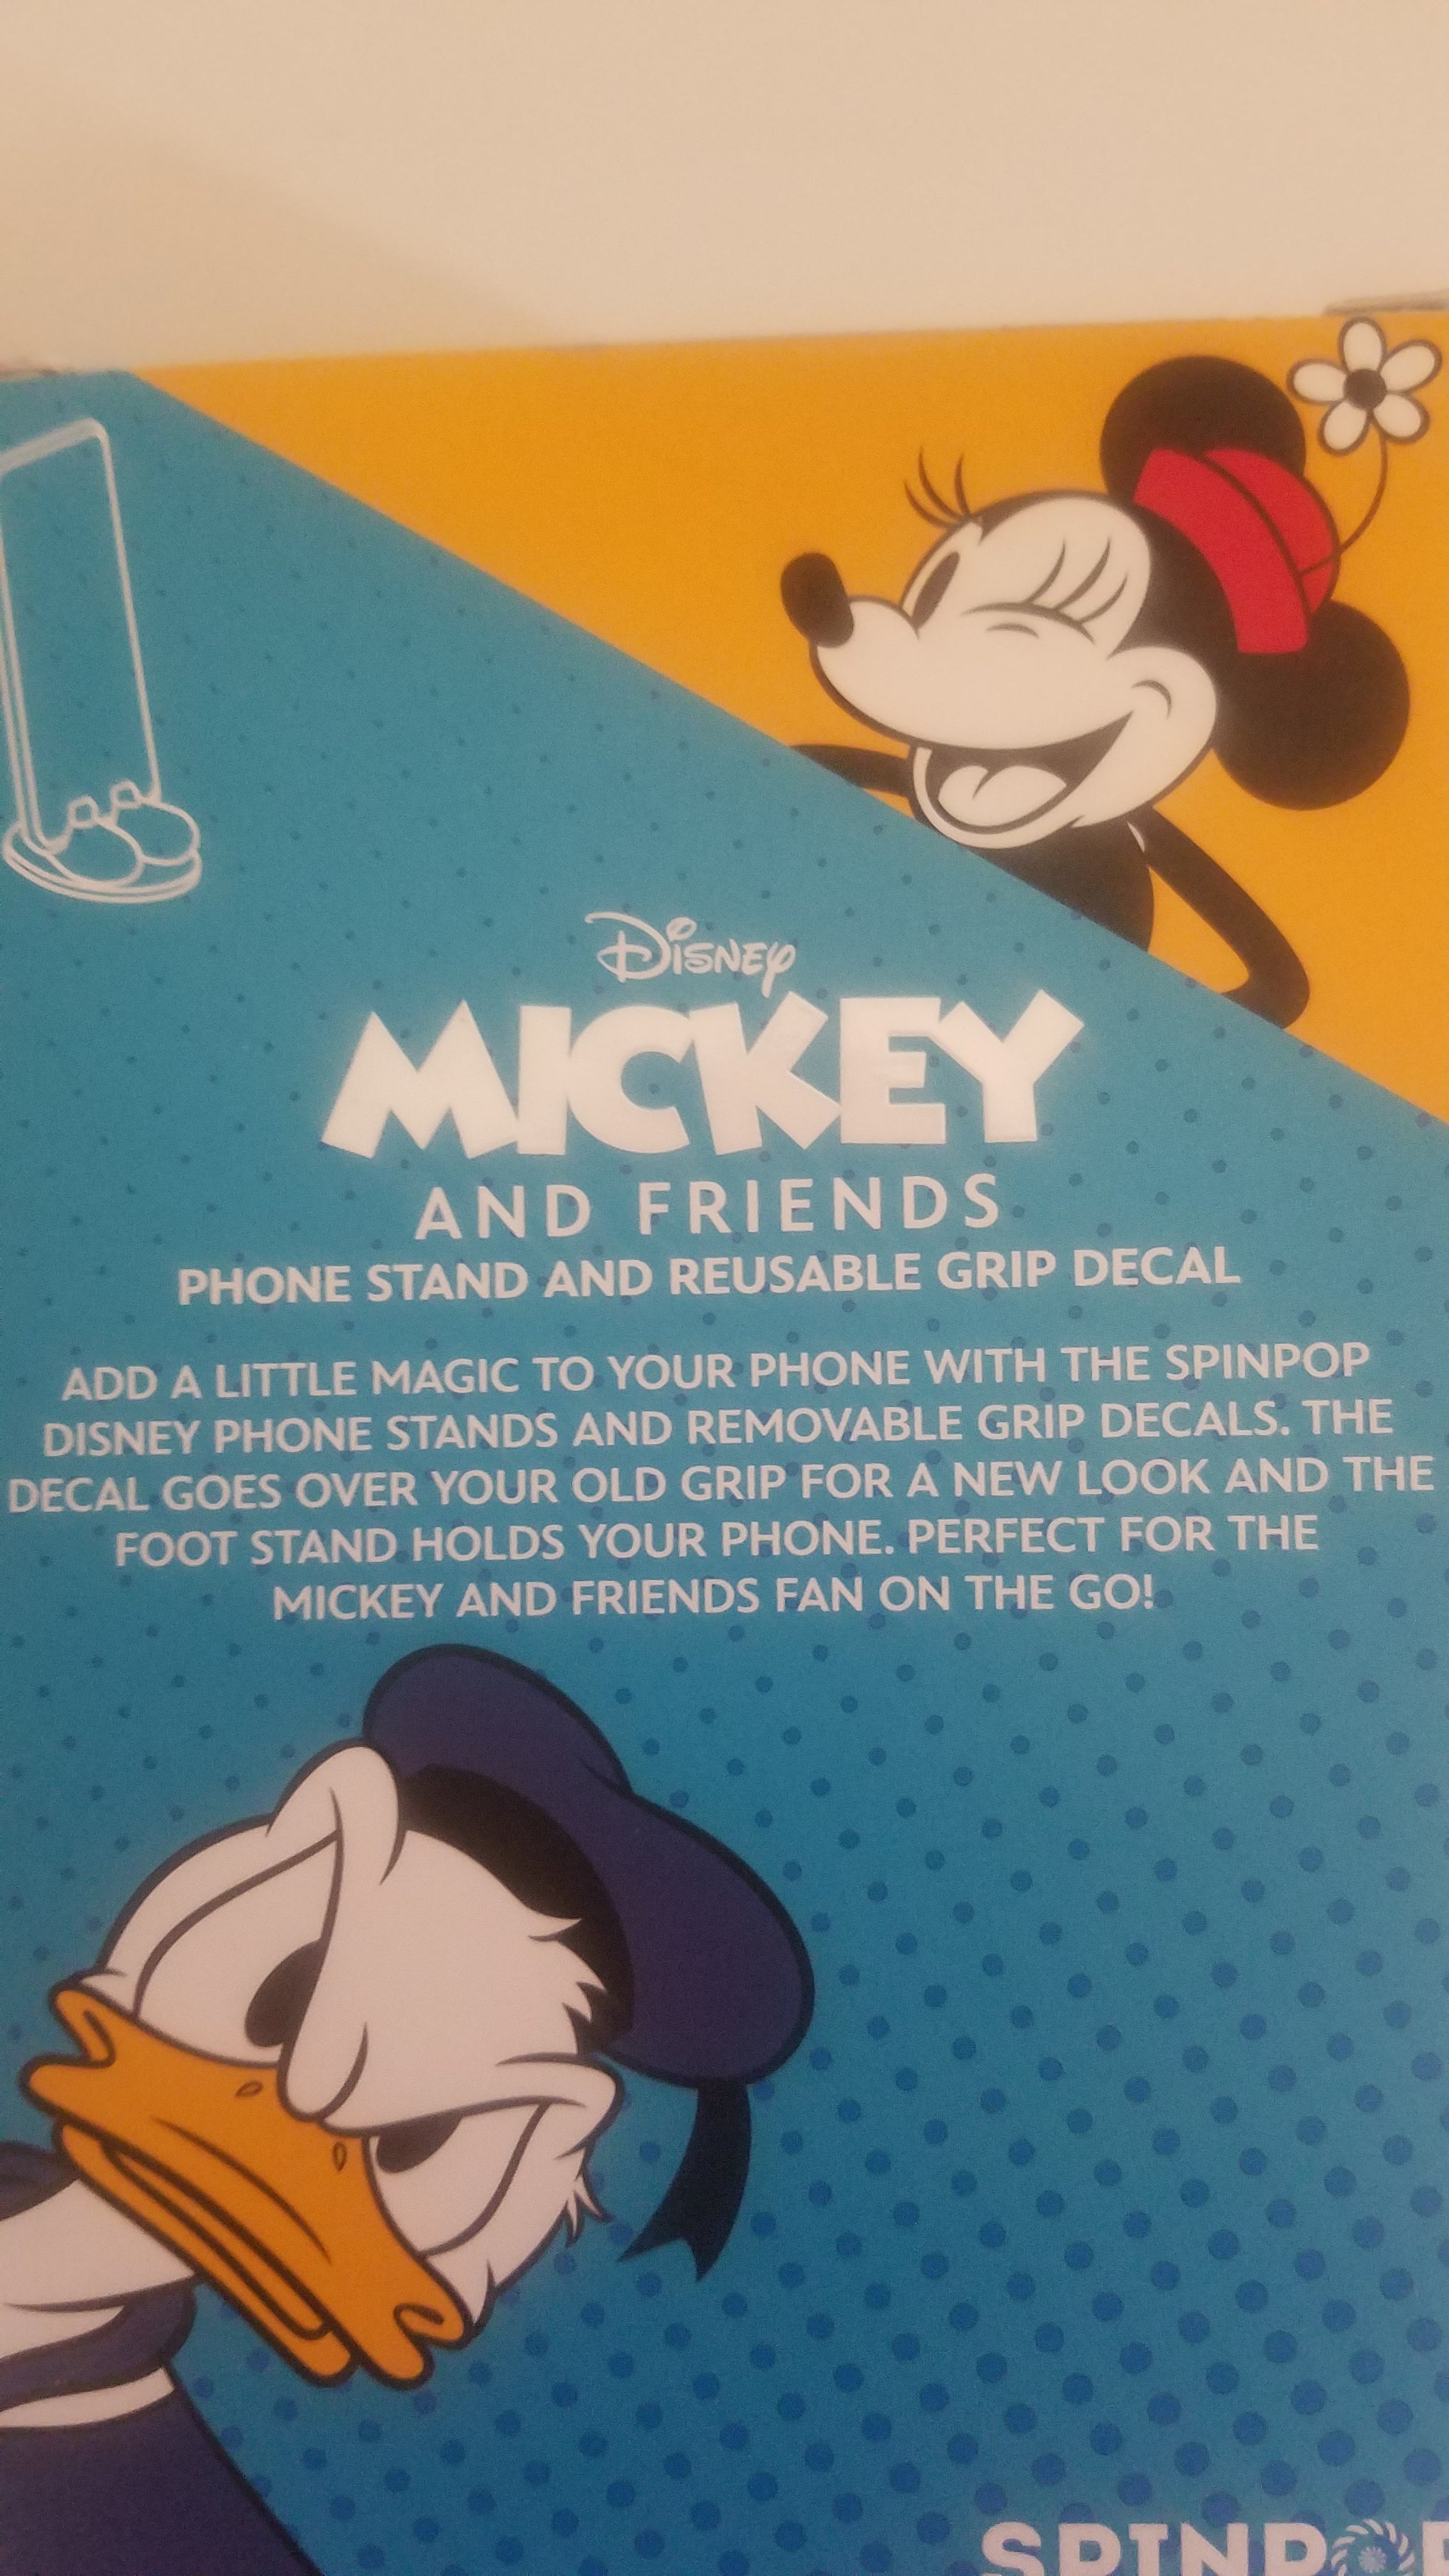 Spin Pop Disney Mickey and Friends Phone Stand Mount and Reusable Grip Decal #2